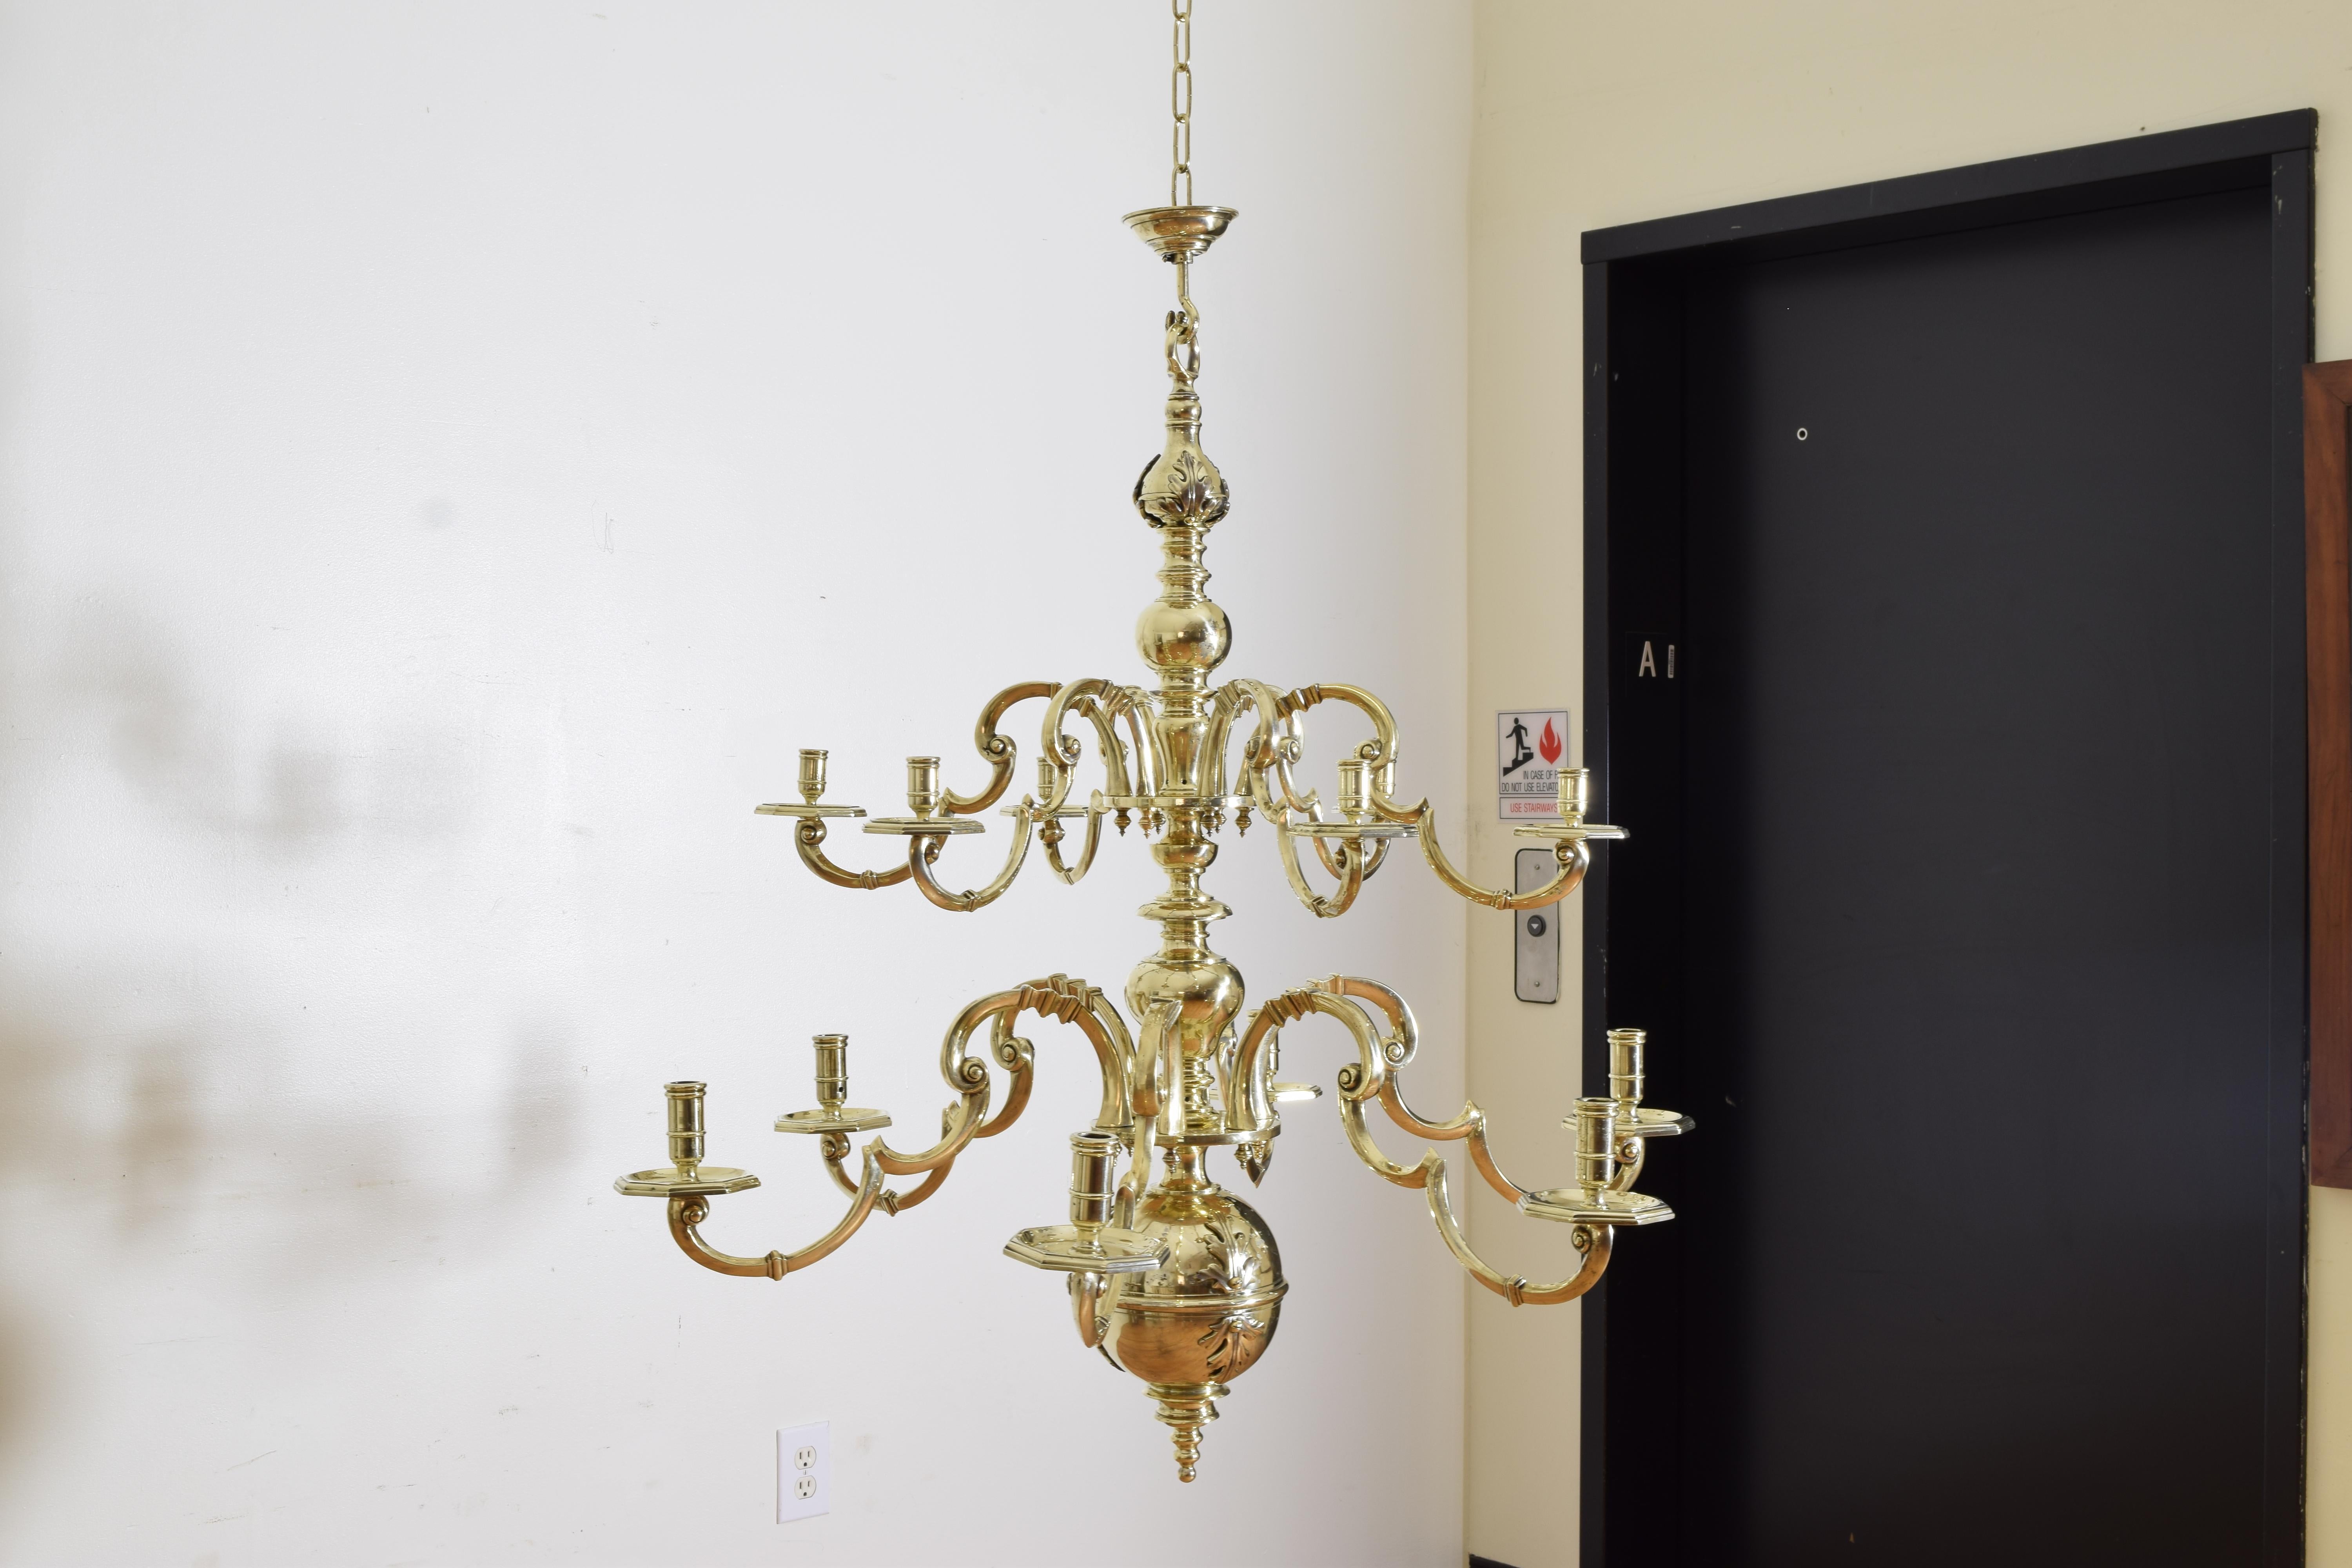 Baroque Revival Exceptional Dutch Baroque Style 2-Tier 12 Light Brass Chandelier, 3rdq 19th cen. For Sale